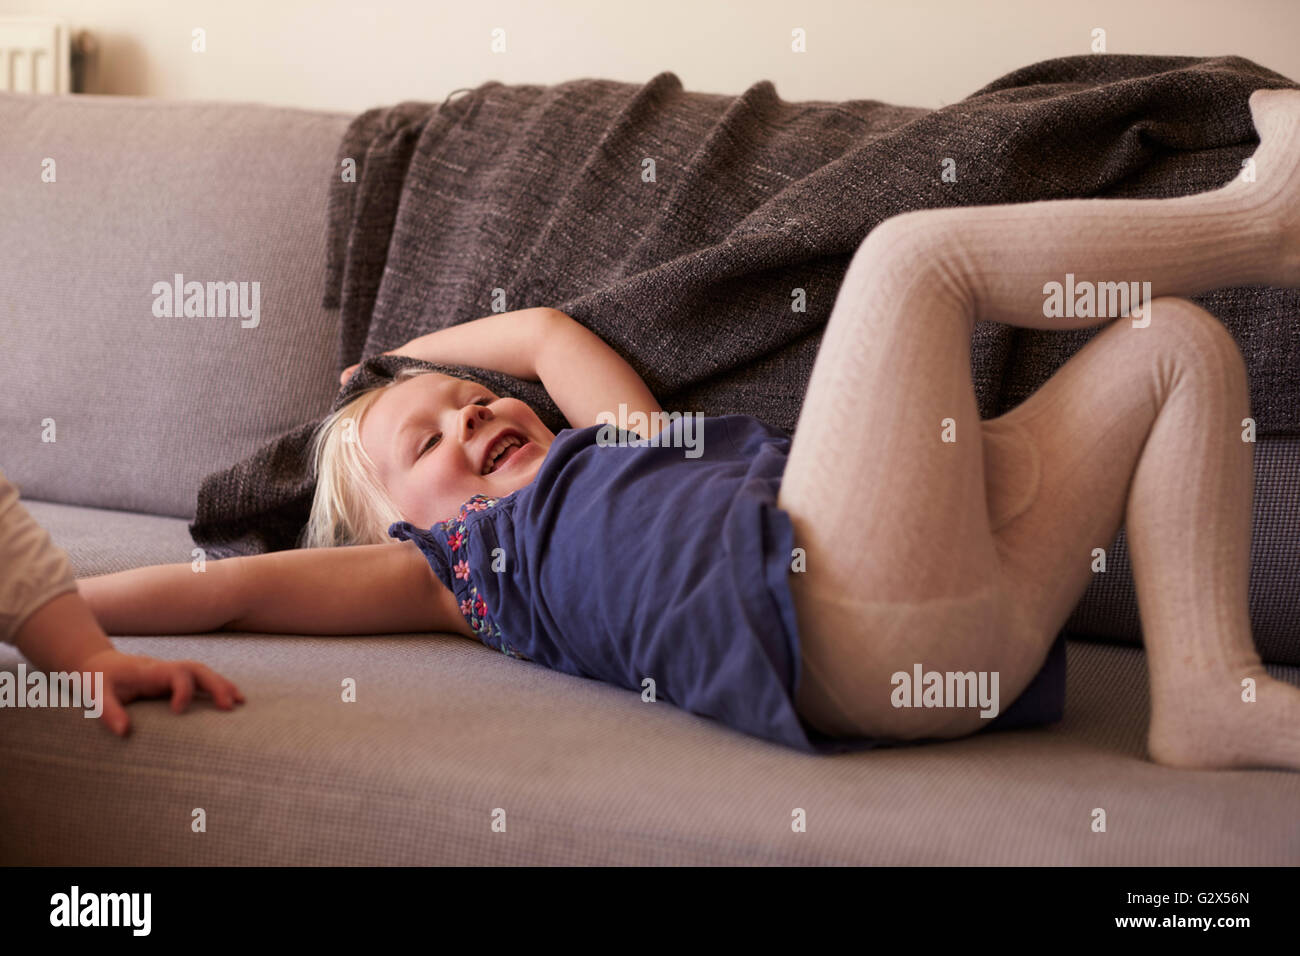 Young Girl Lying On Sofa And Laughing Stock Photo